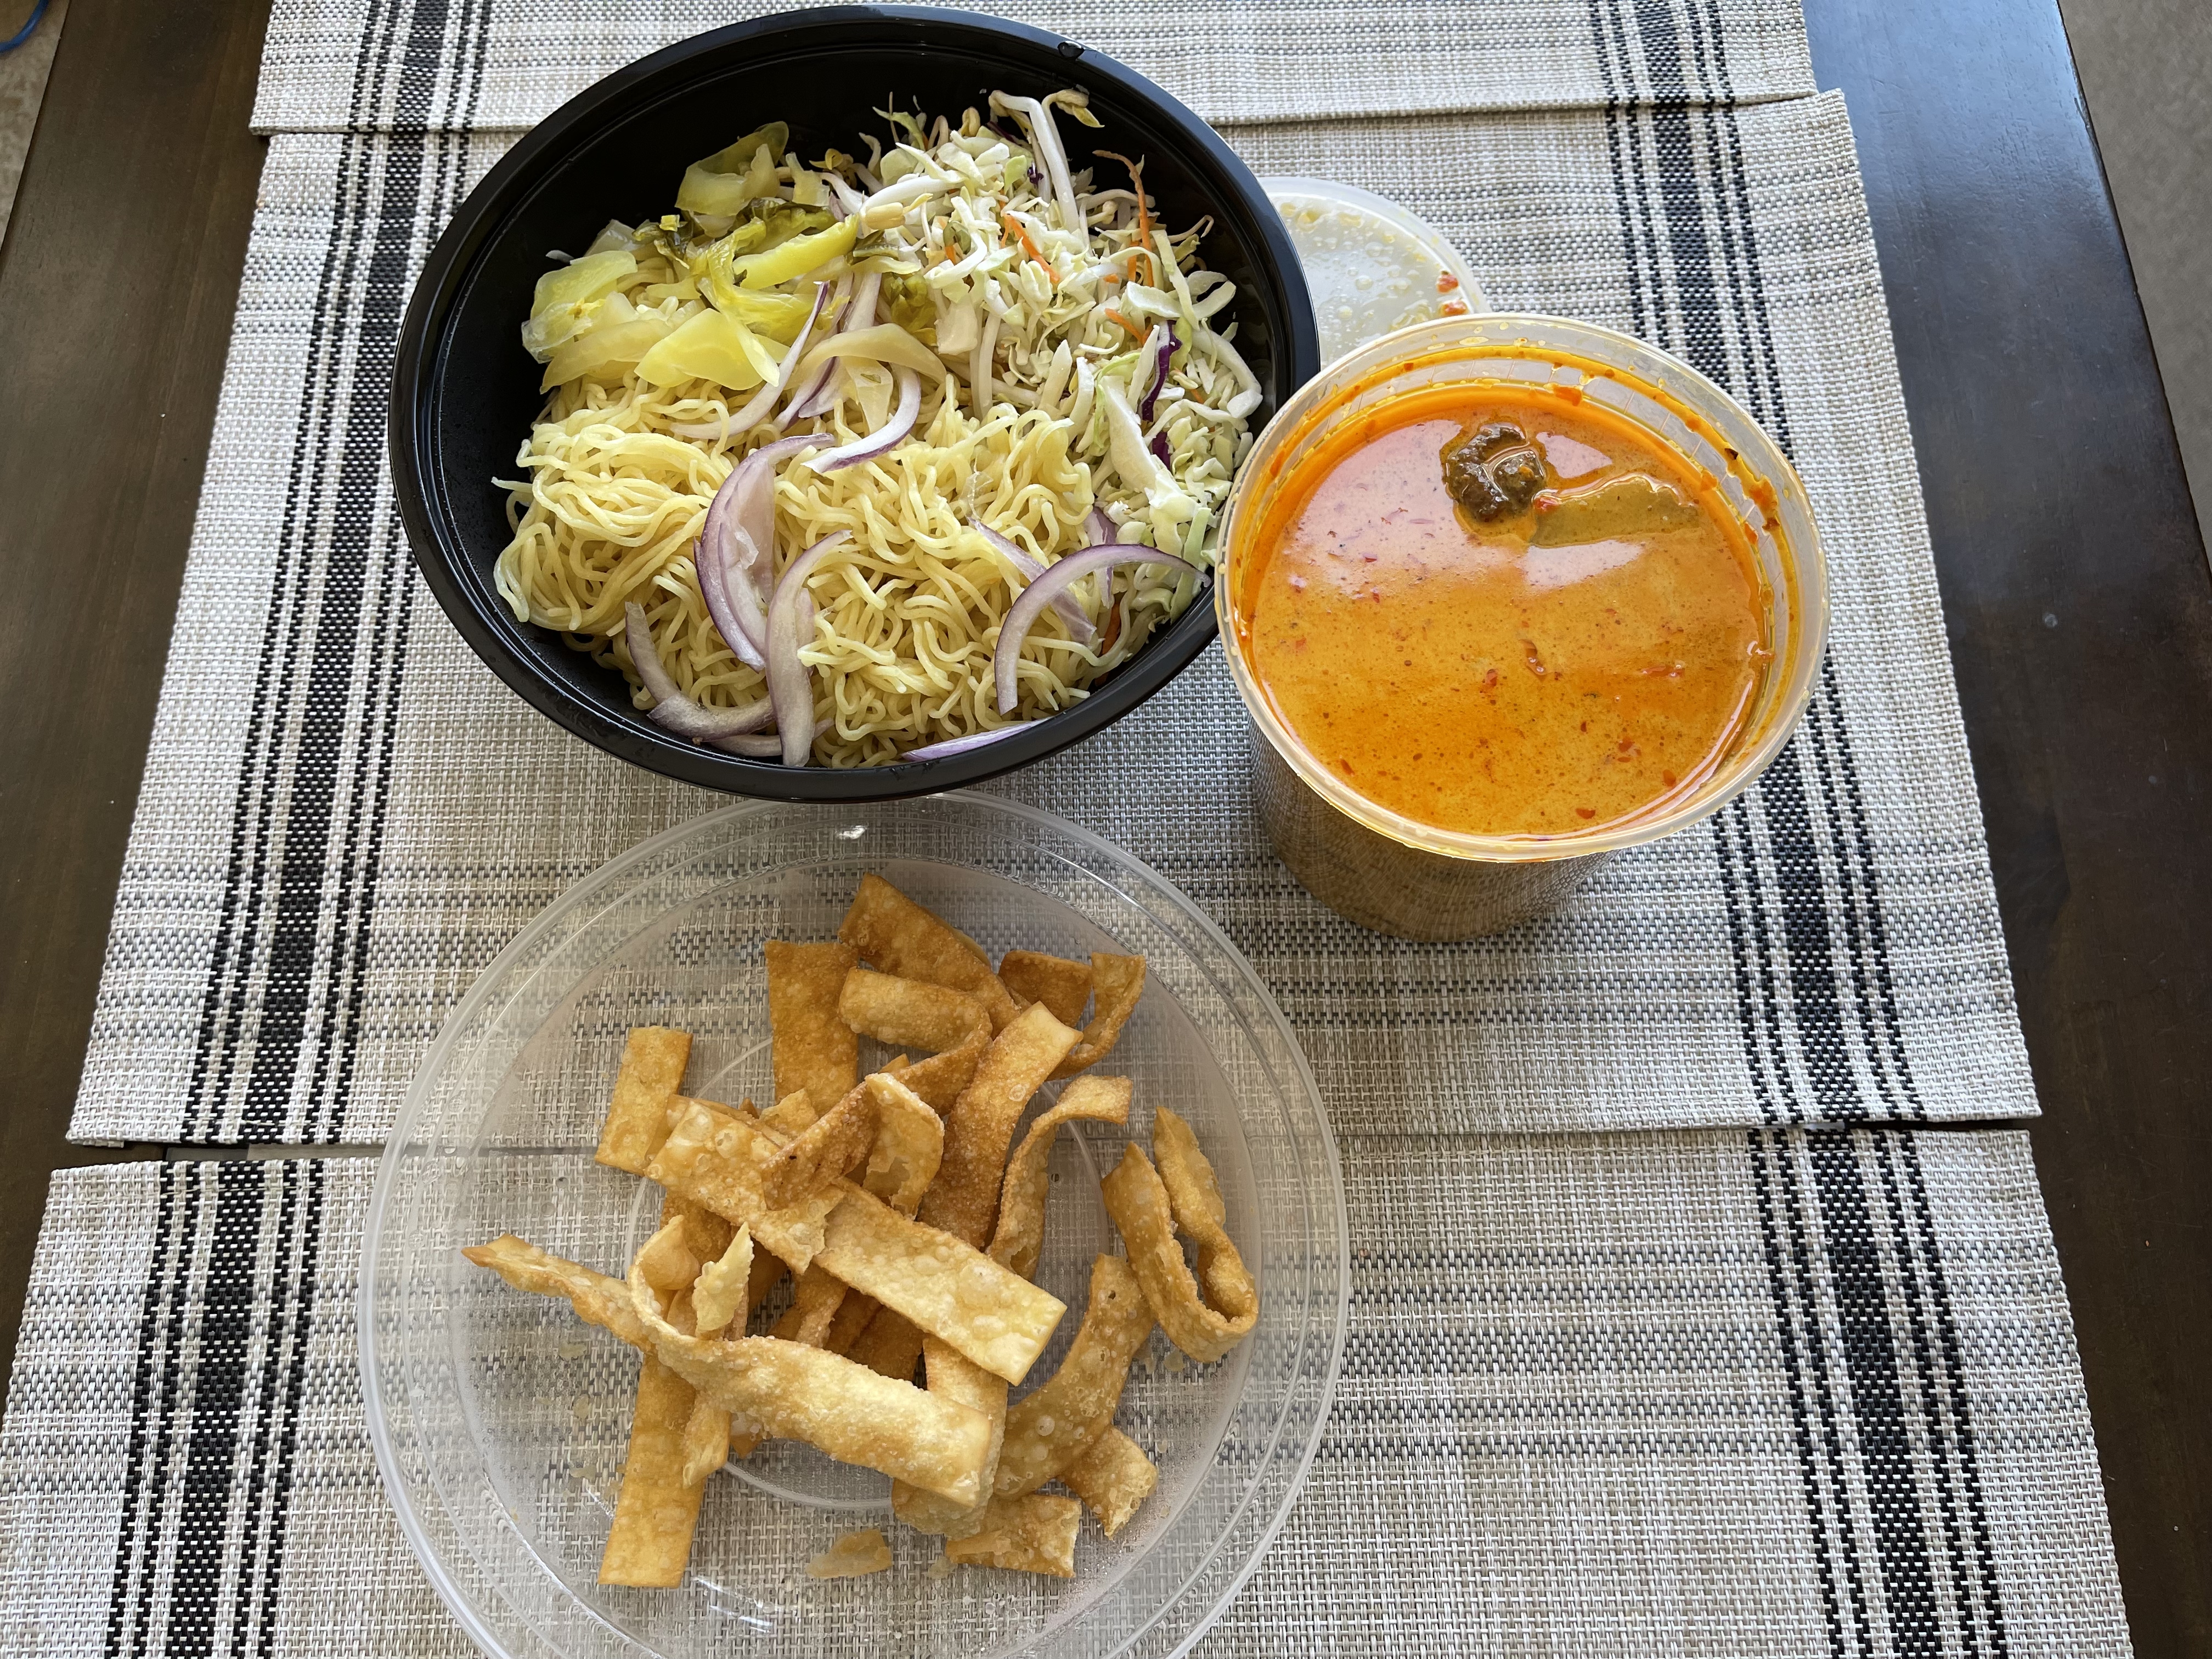 On a table with a brown tablecloth, there are three containers. One is a yellow curry, one is crunchy sticks, and another has noodles and toppings. Photo by Shrivatsa Ravikumar.